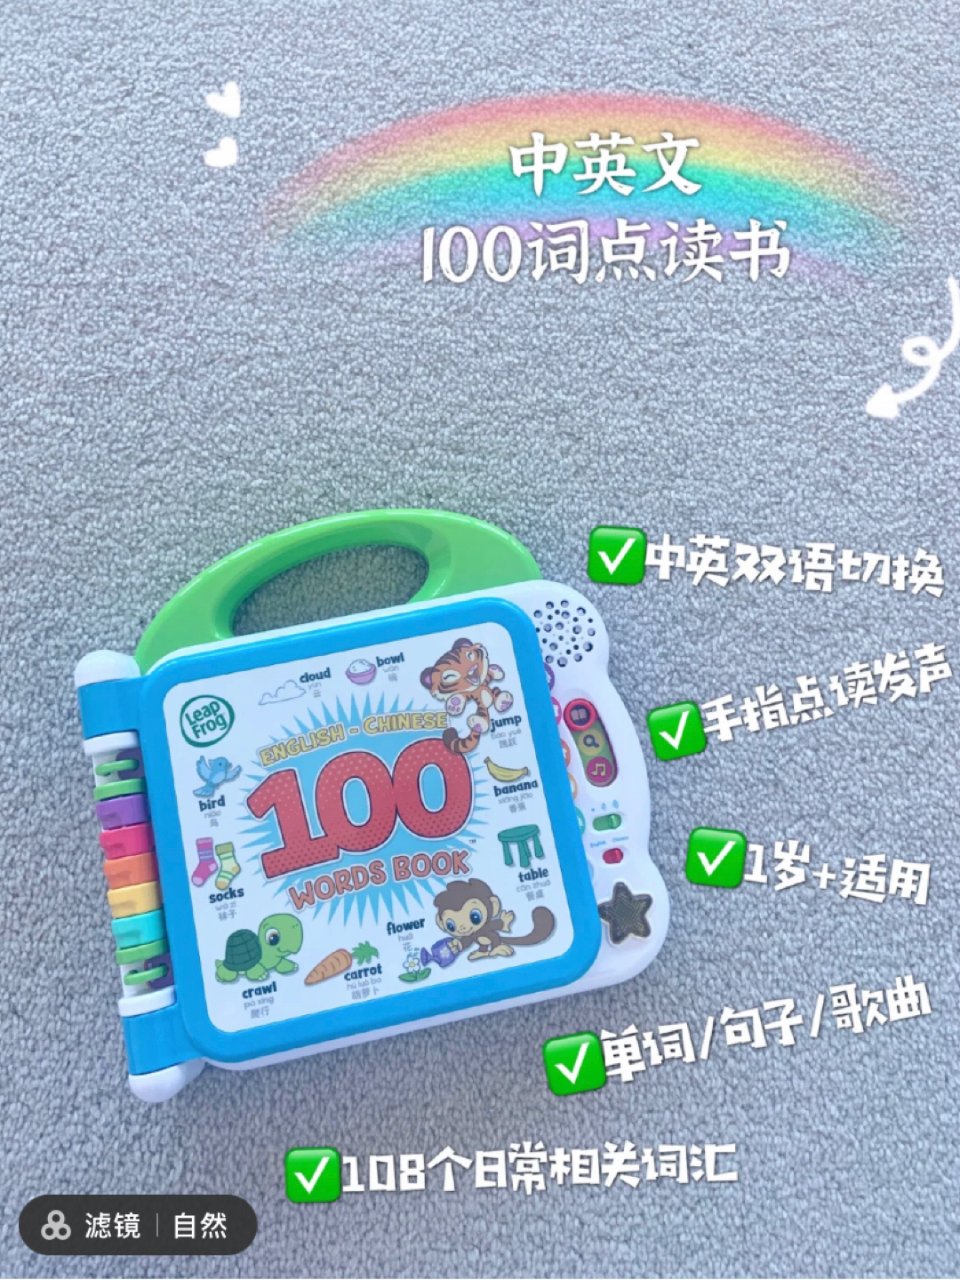 LeapFrog 100 Words Book - English-Chinese + Learning Activity Guide | BIG W